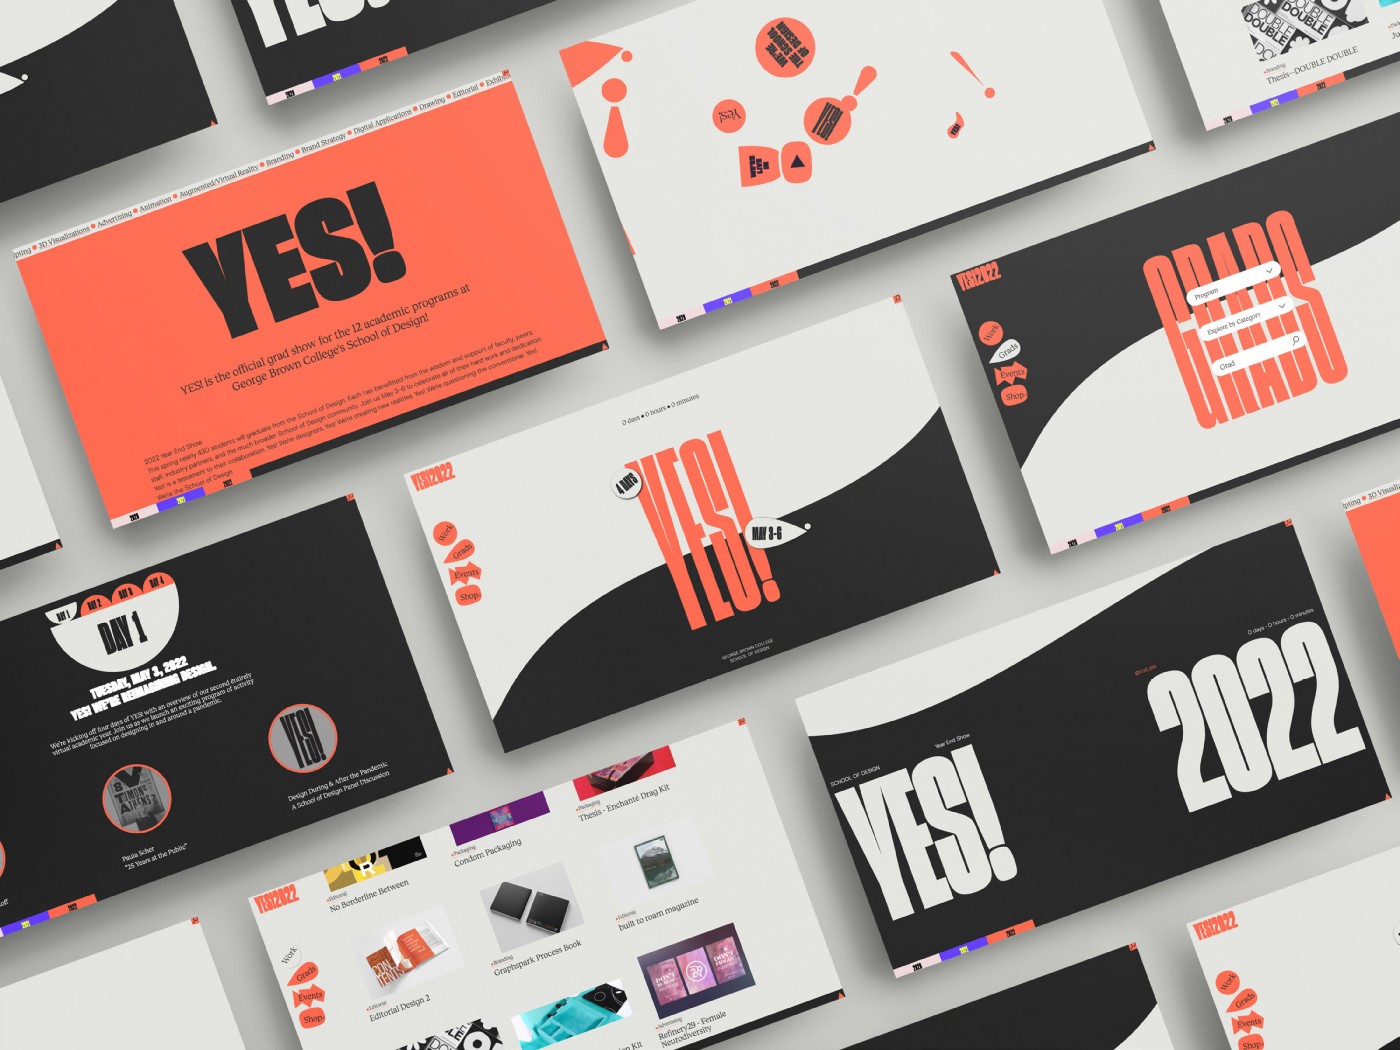 mockups and images of Yes! 2021 Virtual Year End Grad Show, 2021